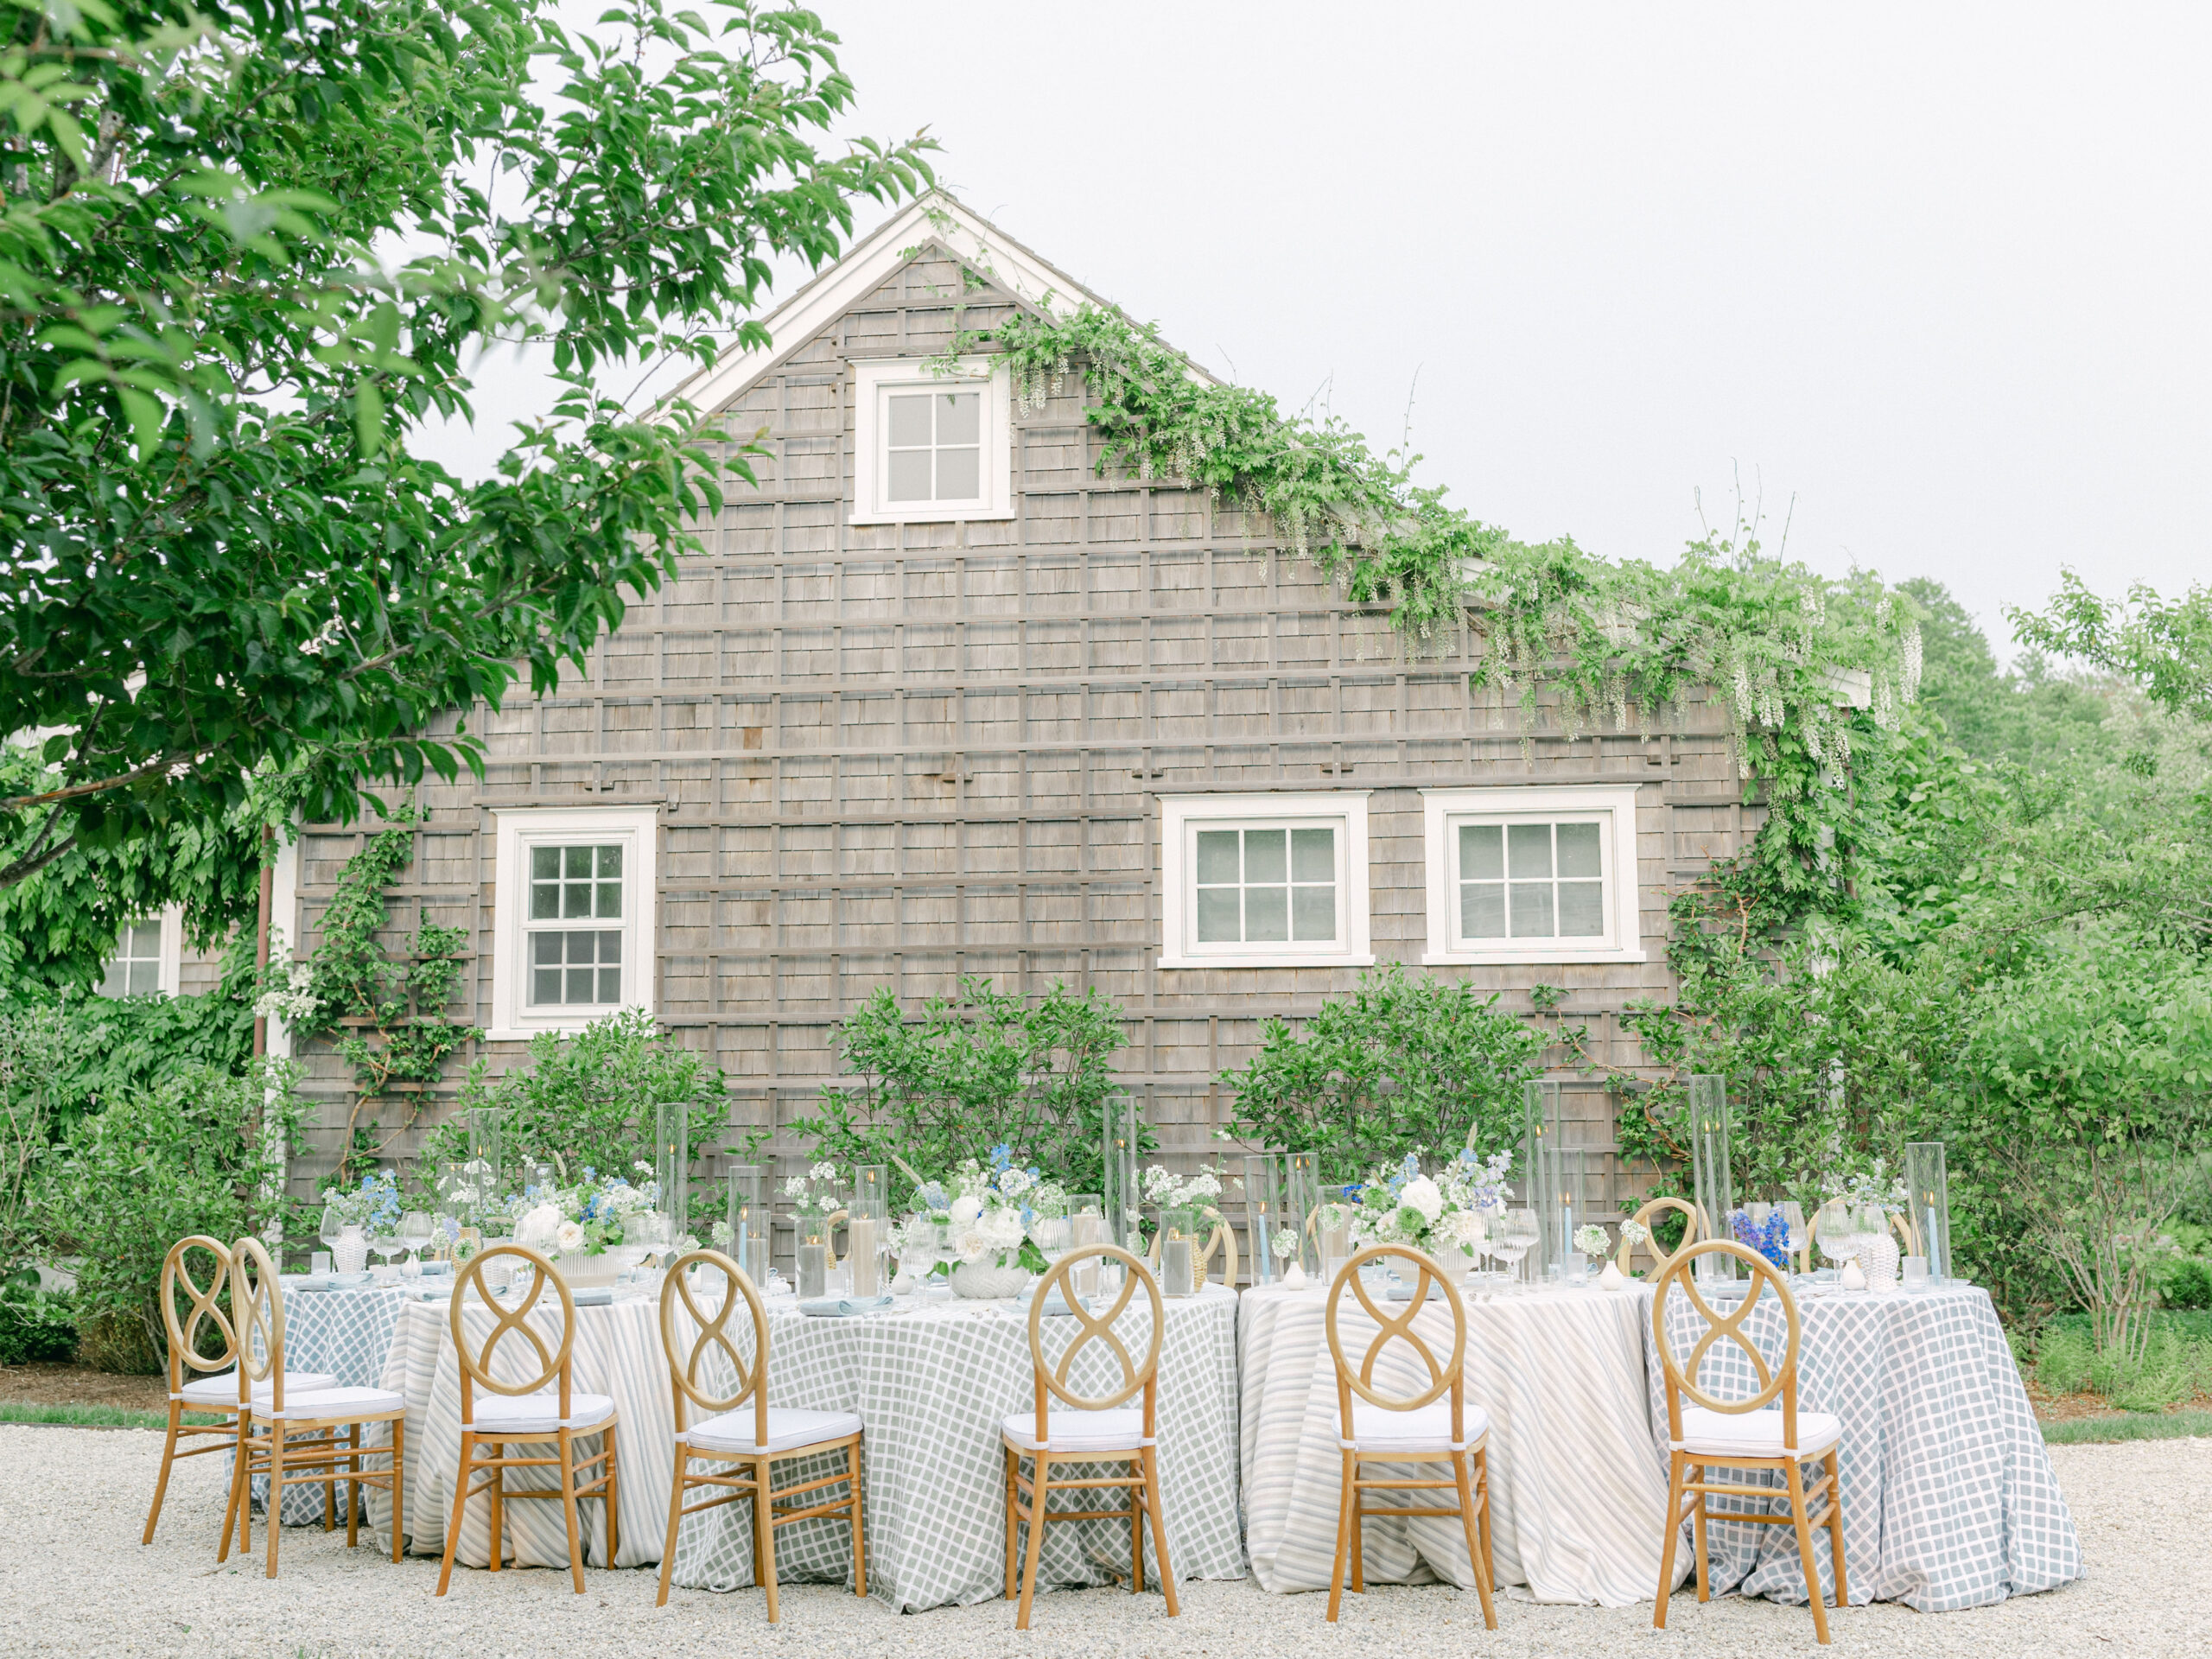 Tips to elevate your wedding with custom linens: tips from Stefanie Skelley and Nicholas Vitale on the Wedding Secrets Unveiled! podcast